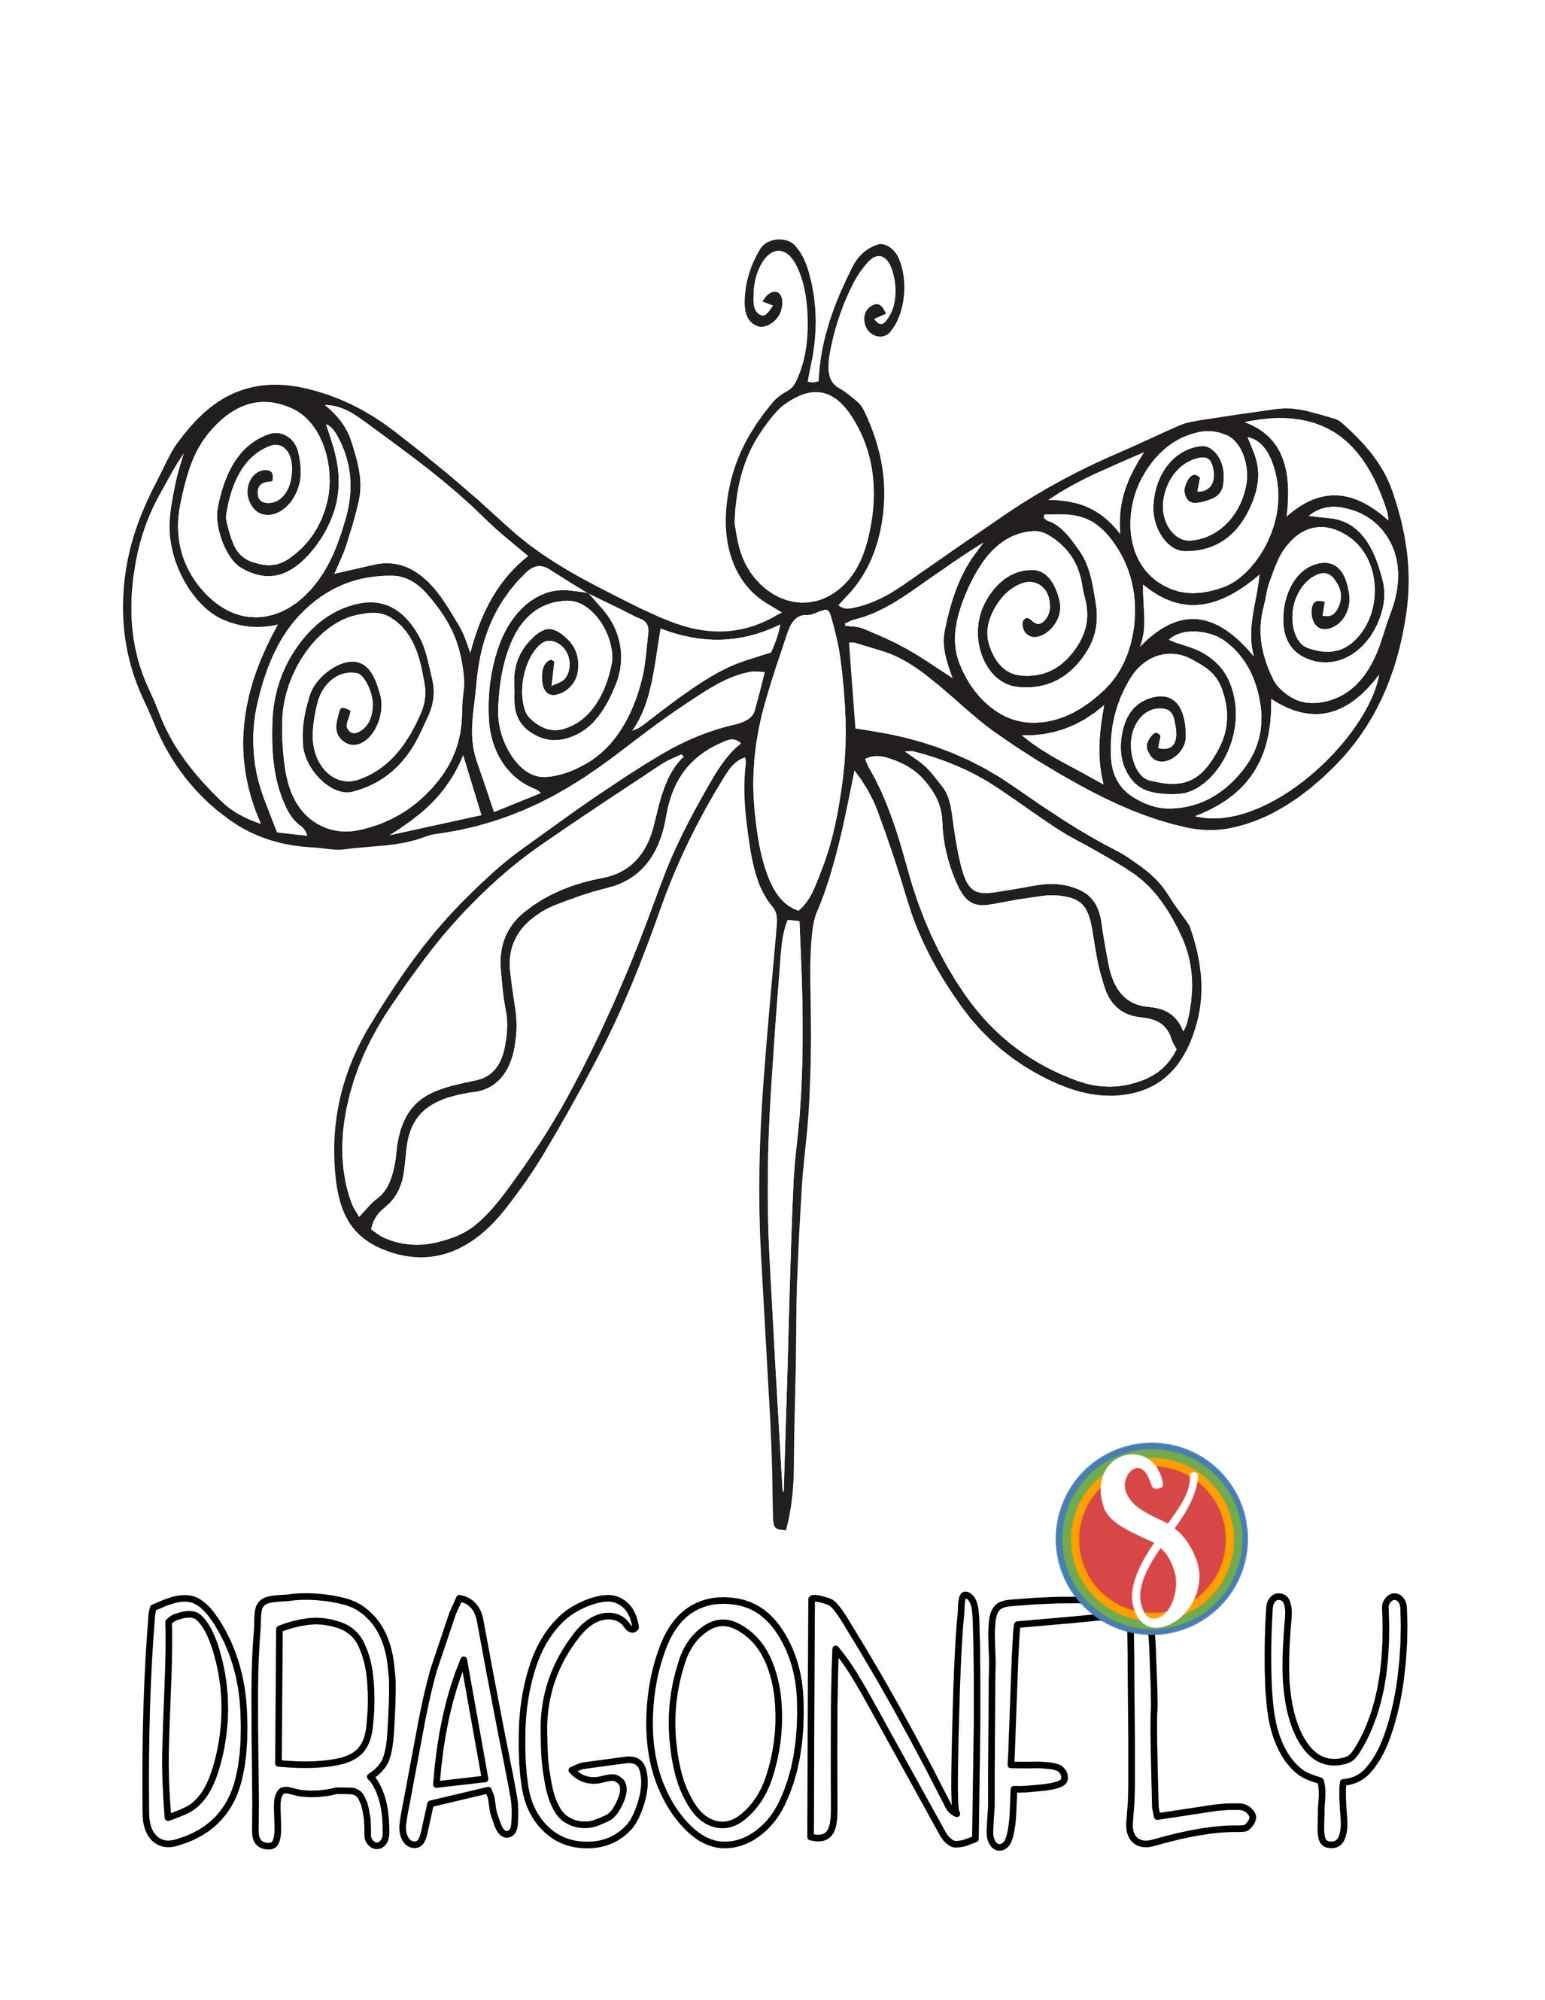 dragonfly coloring page, simple dragonfly outline with doodles inside